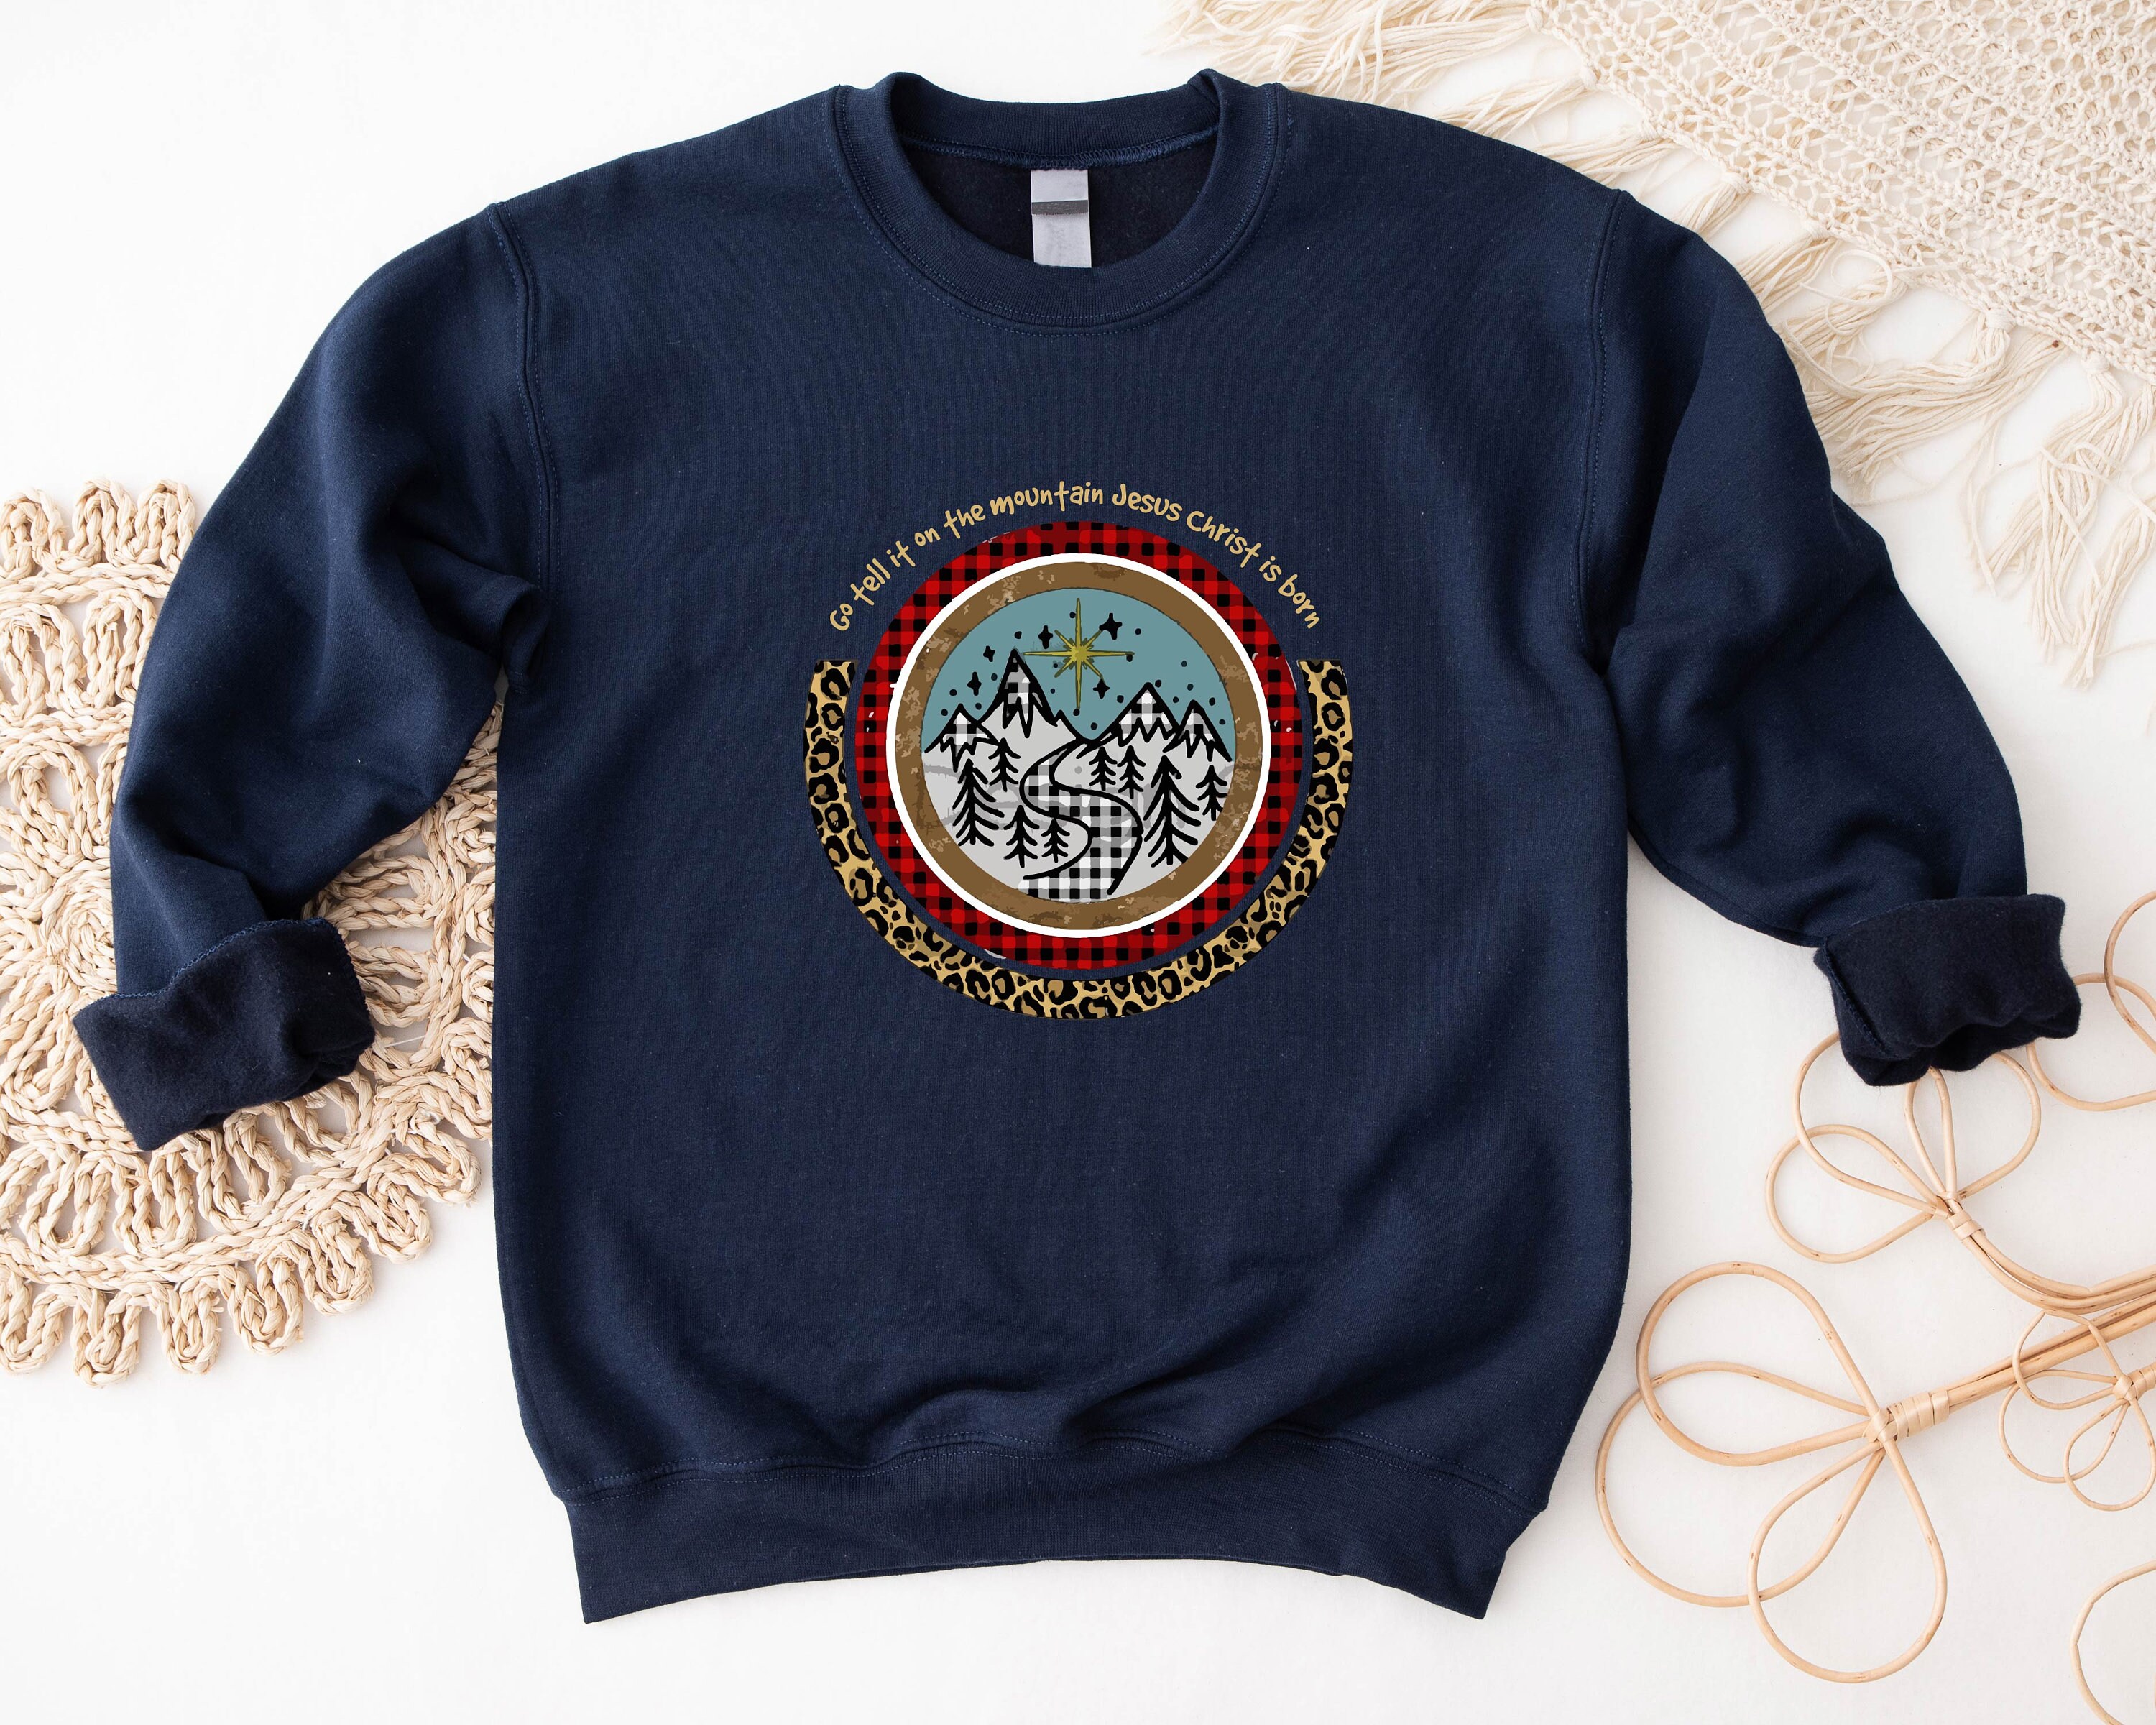 Discover Go Tell It On The Mountain Jesus Christ Is Born Sweatshirt